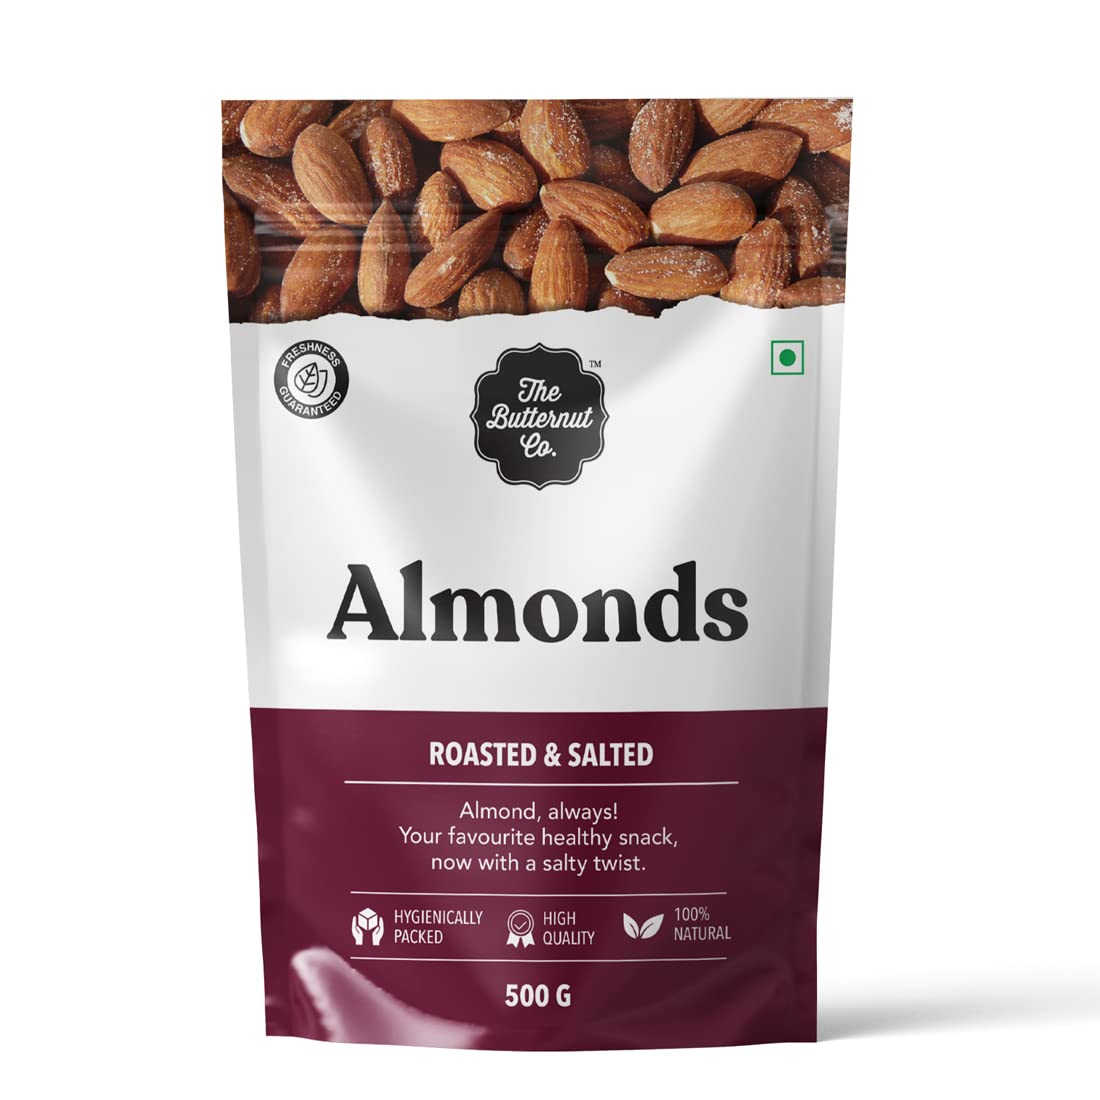 The Butternut Co. Natural Californian Almonds Roasted & Salted 500g | 100% Natural | High Protein & High Fiber | Gluten Free | Whole Salted Natural Almonds